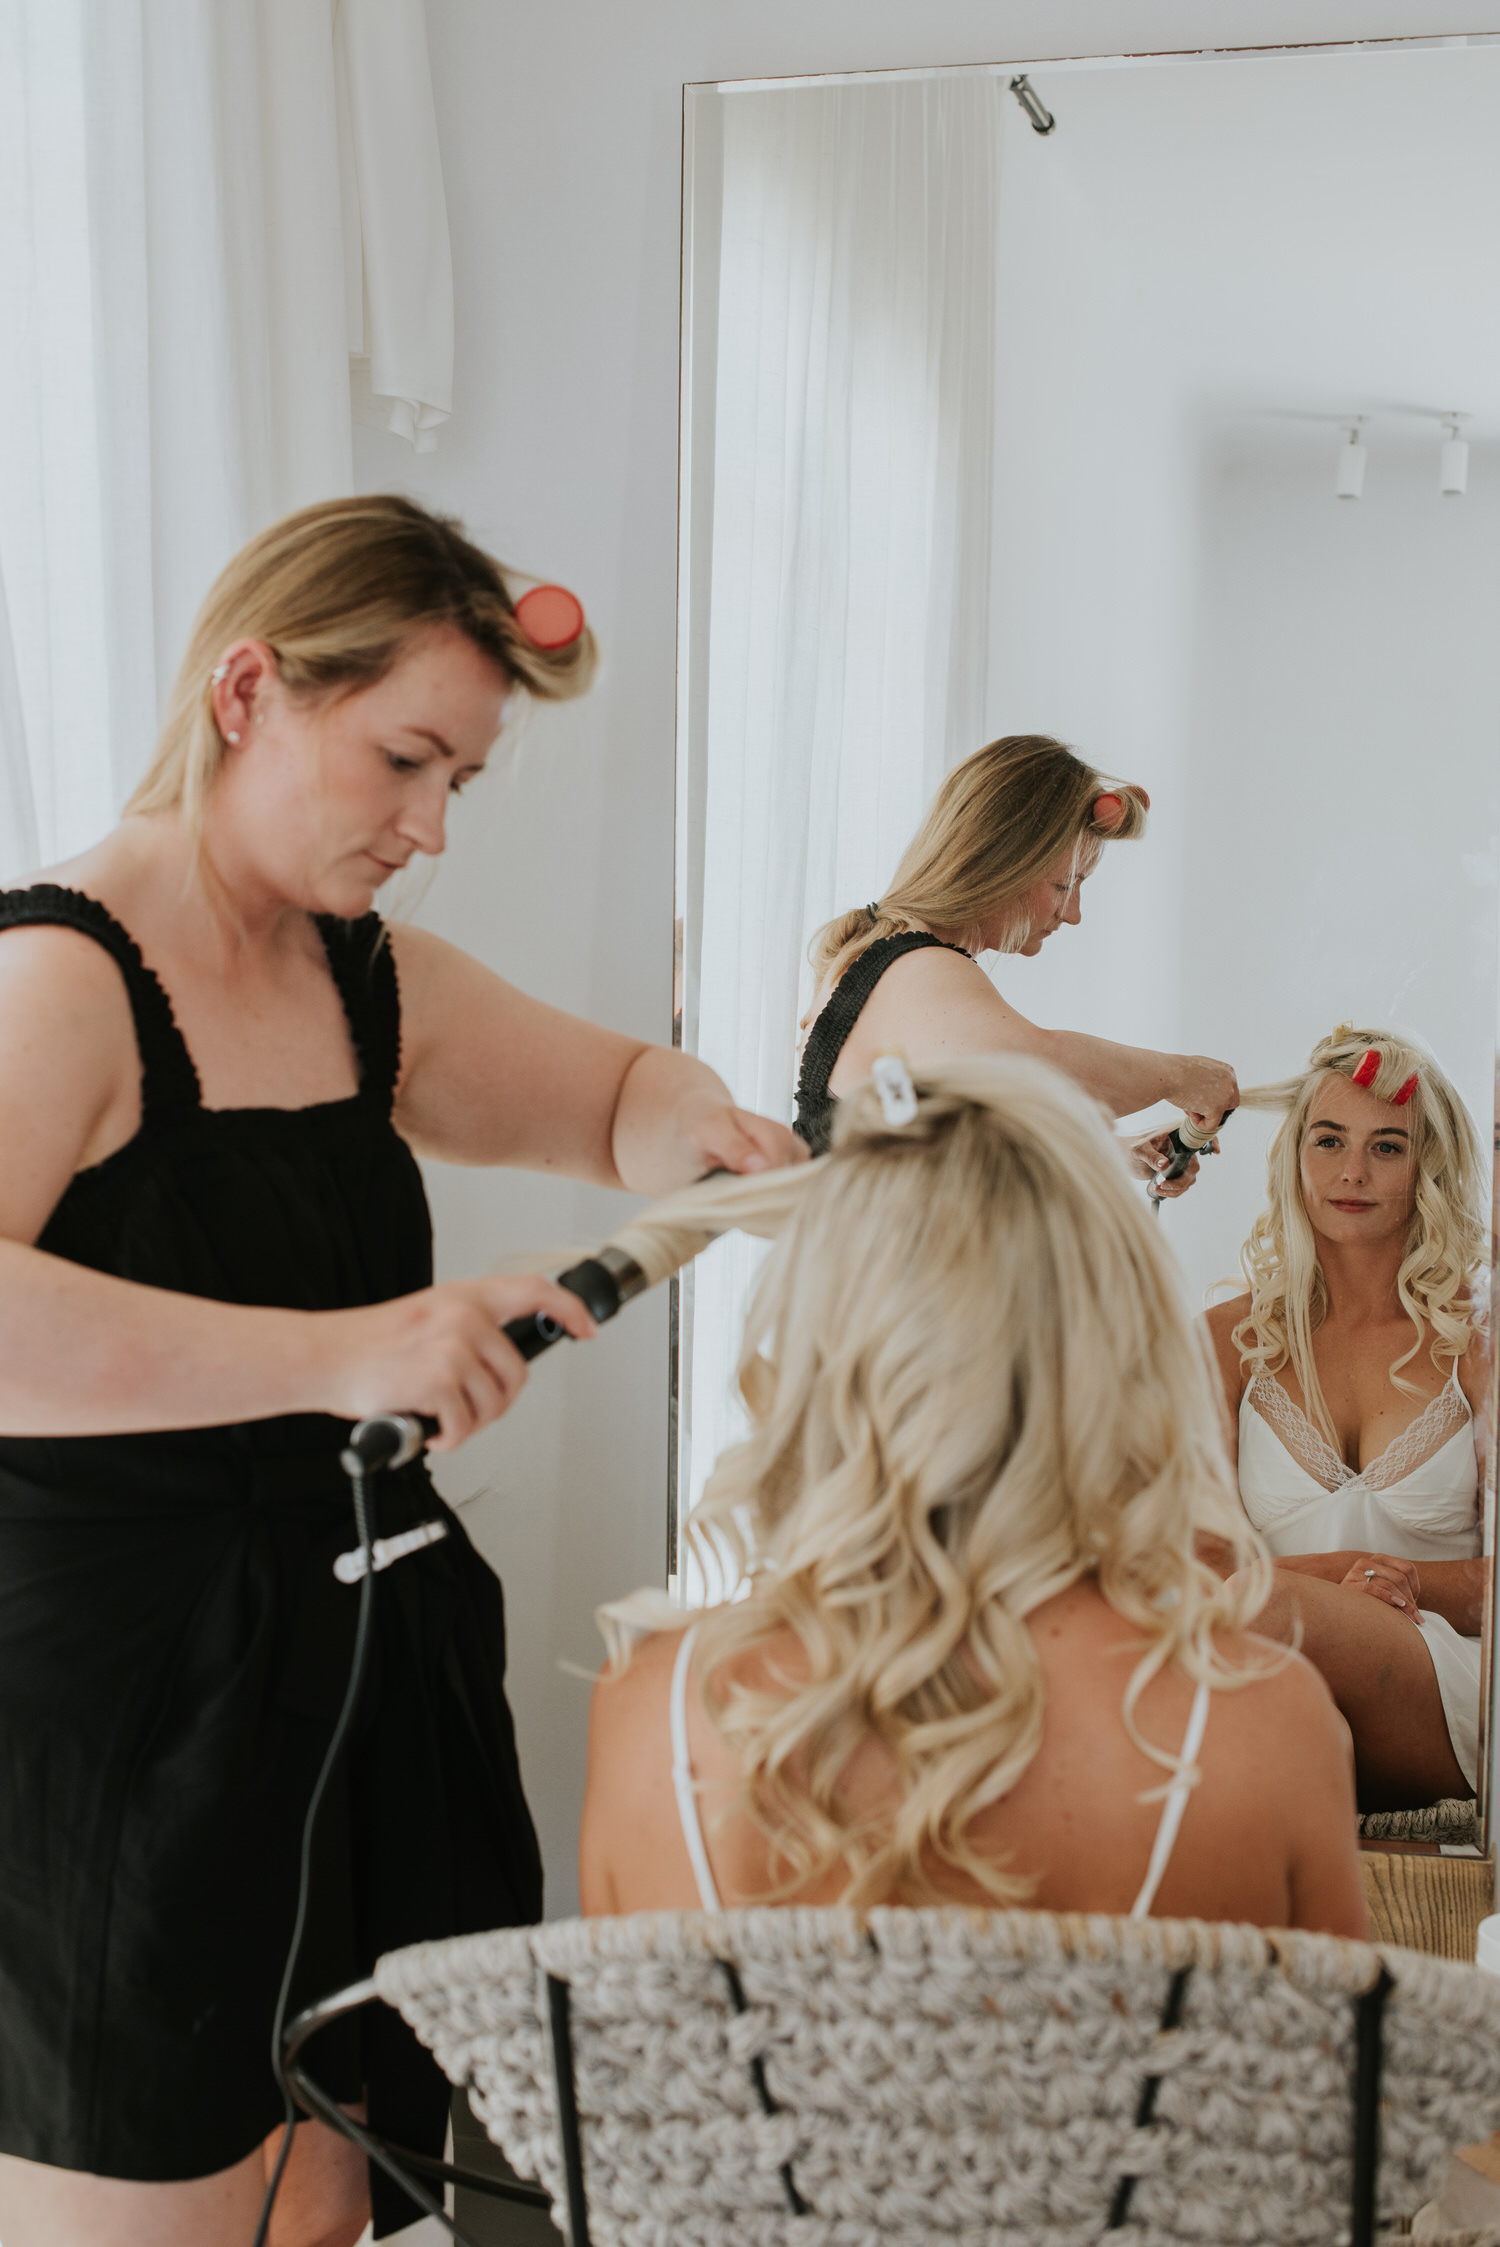 Mykonos wedding photographer: bride sat on a chair looking at herself in the mirror as her bestie does her hair for Mykonos wedding.